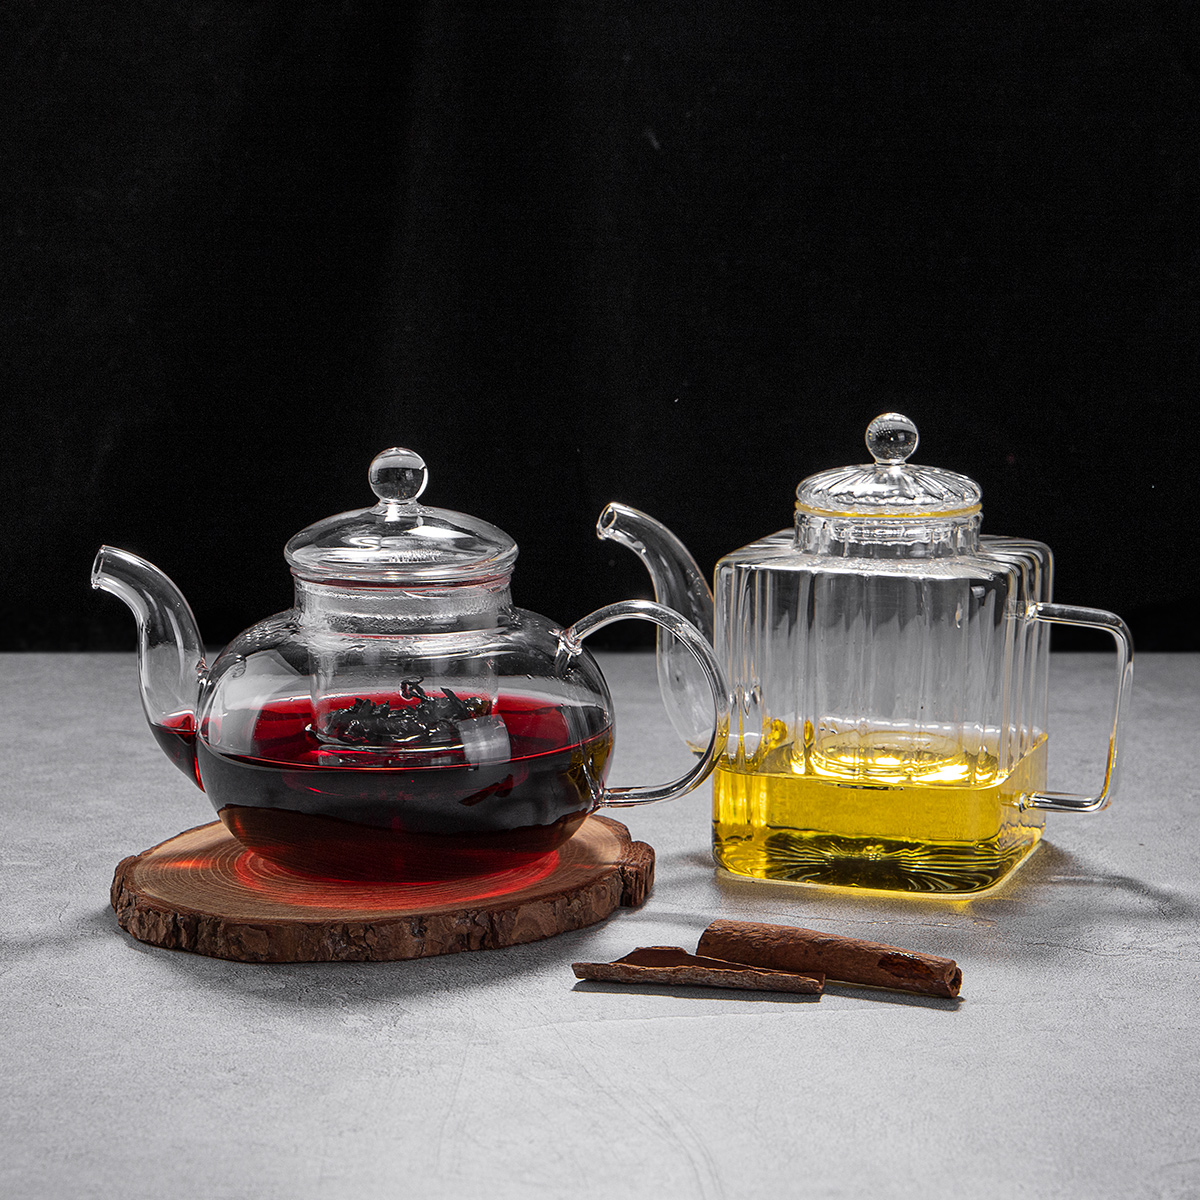 Wholesale Heat resistant Handmade Borosilicate glass teapot with infuser